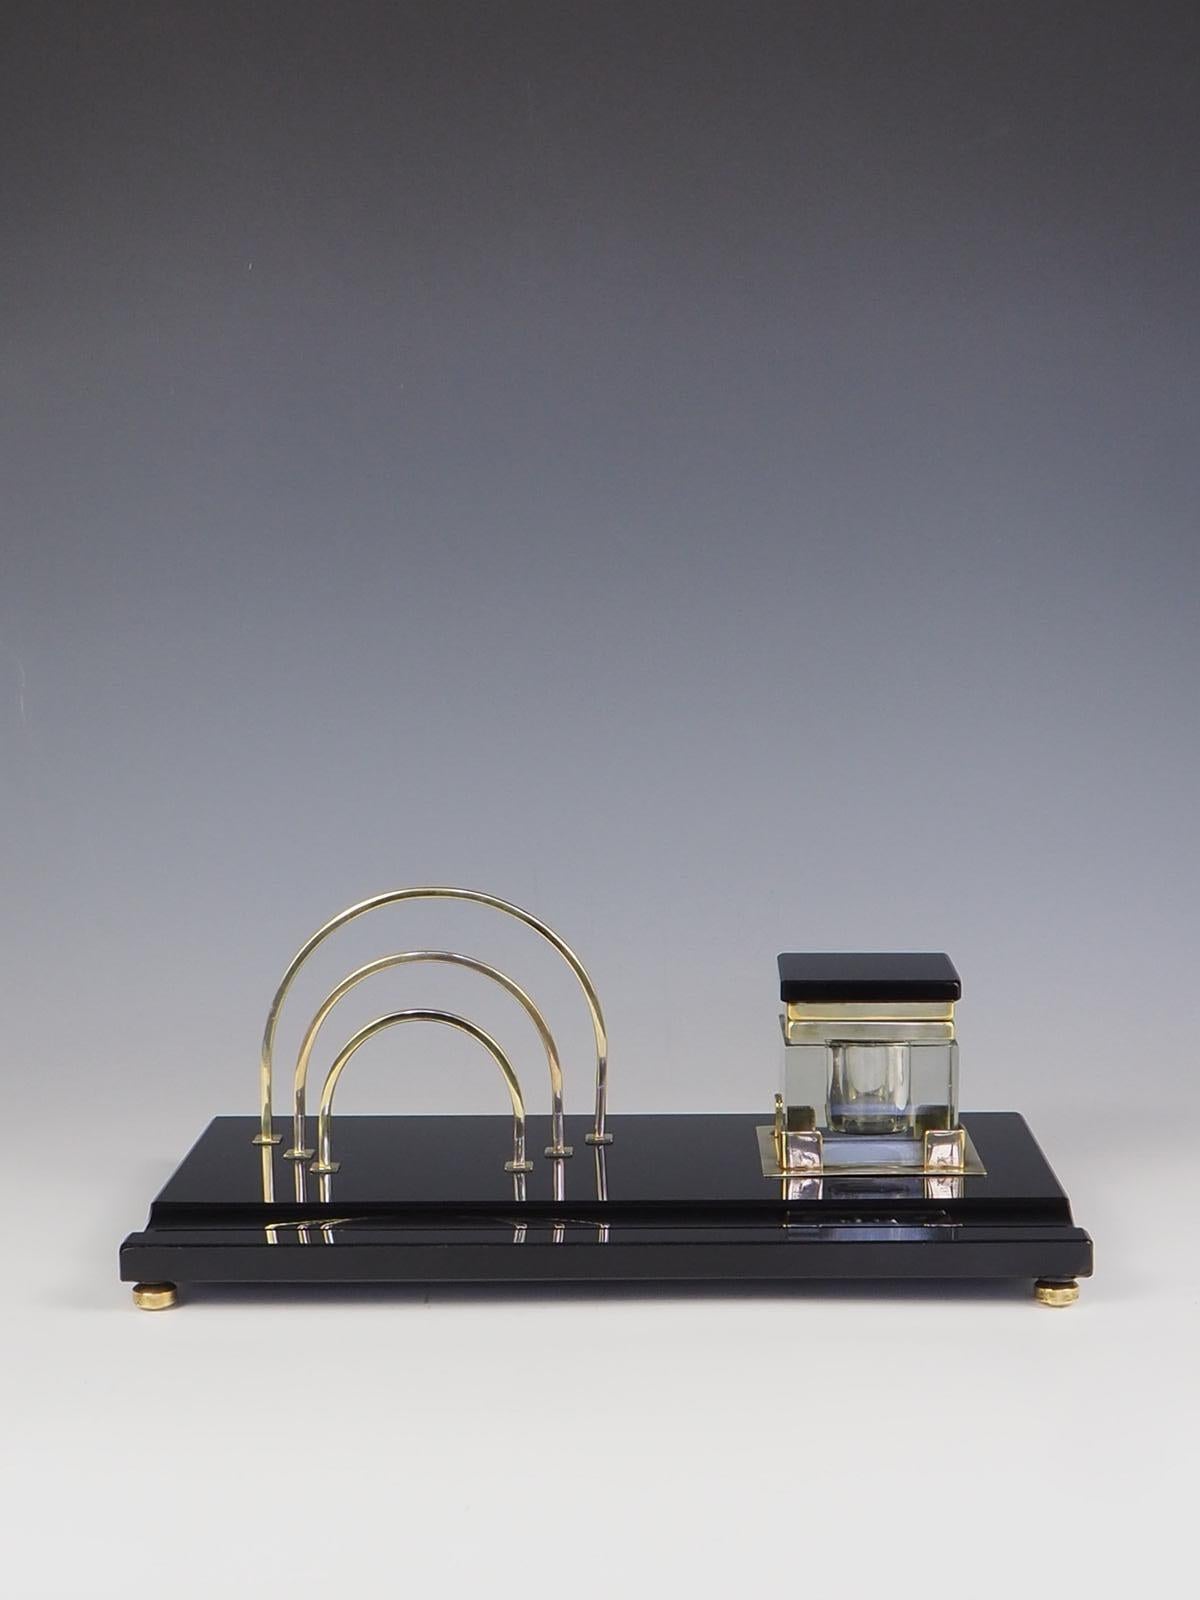 Elegant Art Deco Black & Gold Desk Tidy is a stunning piece that exudes sophistication and style. Crafted from black glass, this desk tidy features intricate gold detailing that adds a touch of luxury.

Desk tidy includes an ink well, letter rack,